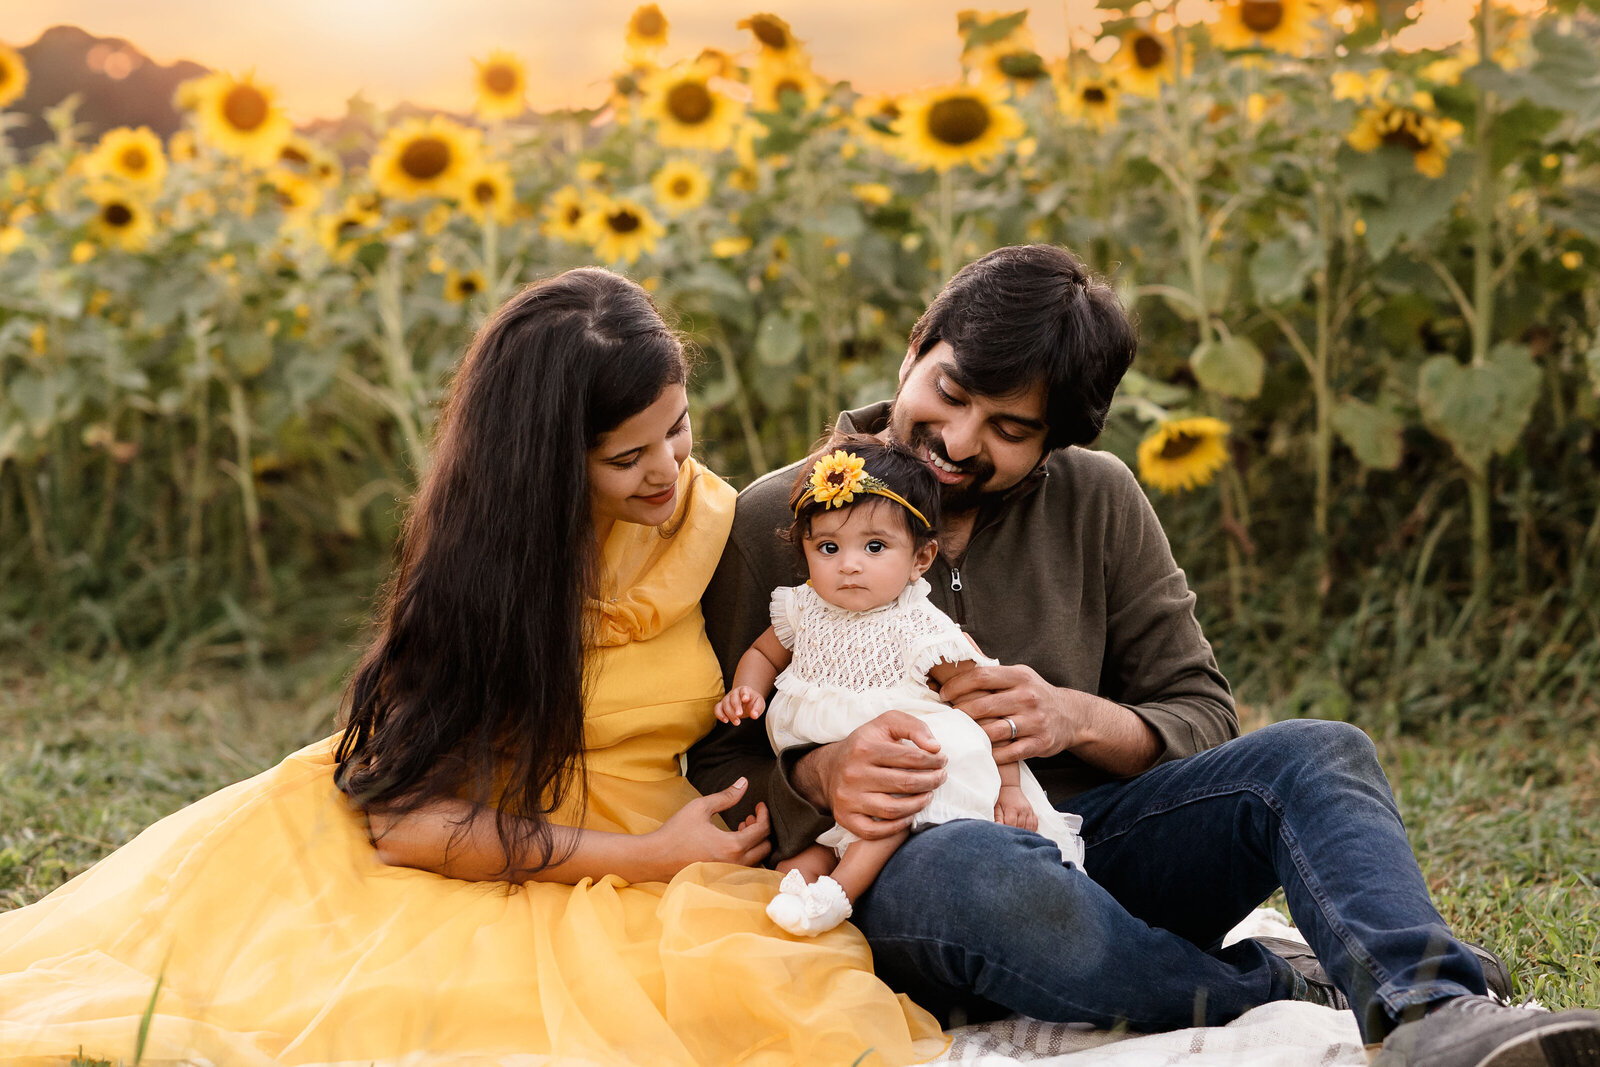 baby photography prices near me